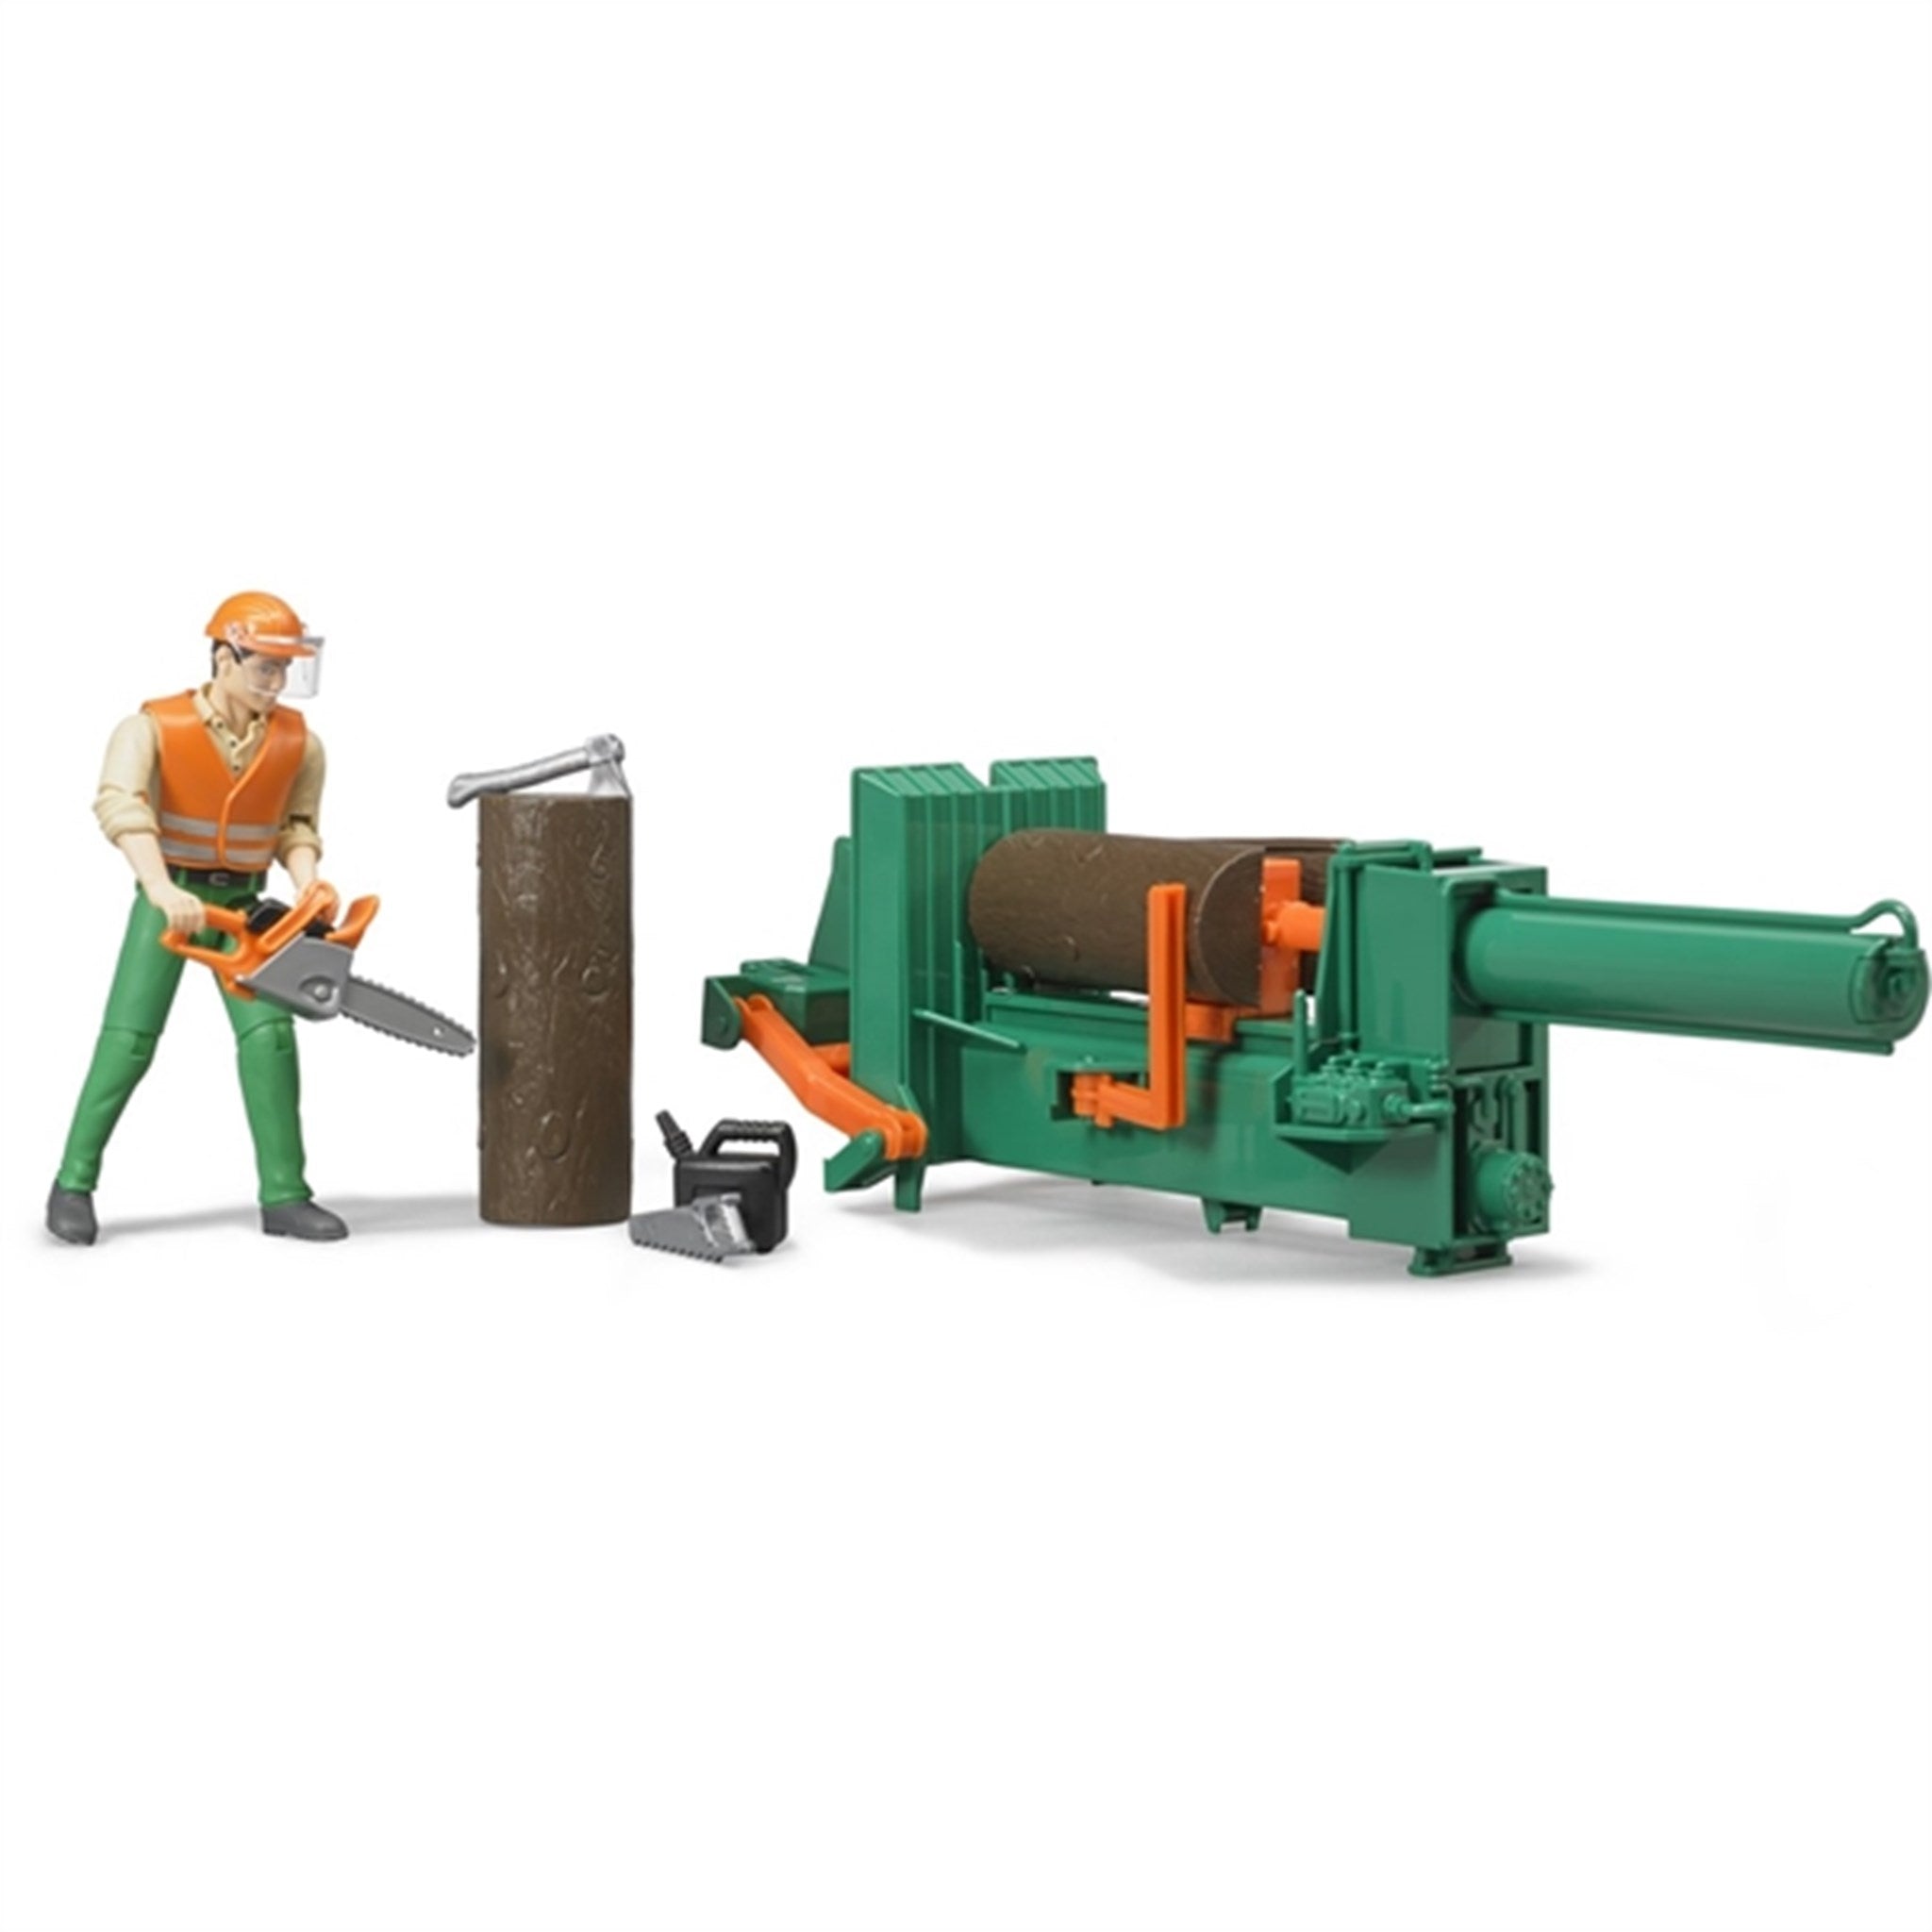 Bruder Figure-Set Forestry with Accessories